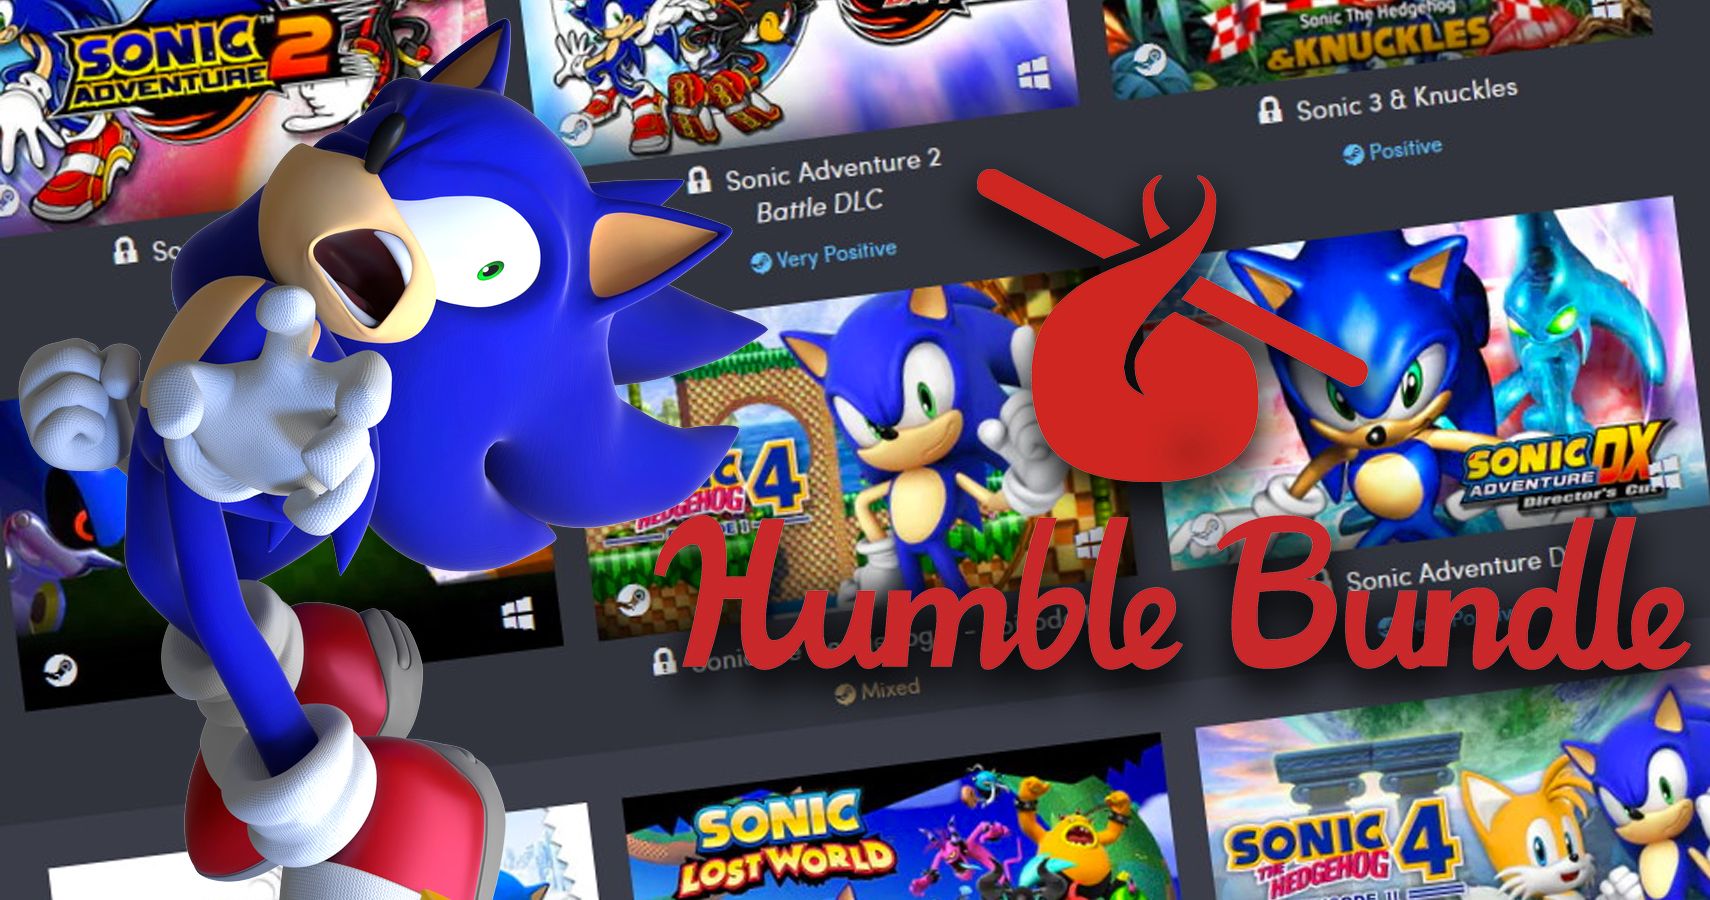 Buy Sonic Mania from the Humble Store